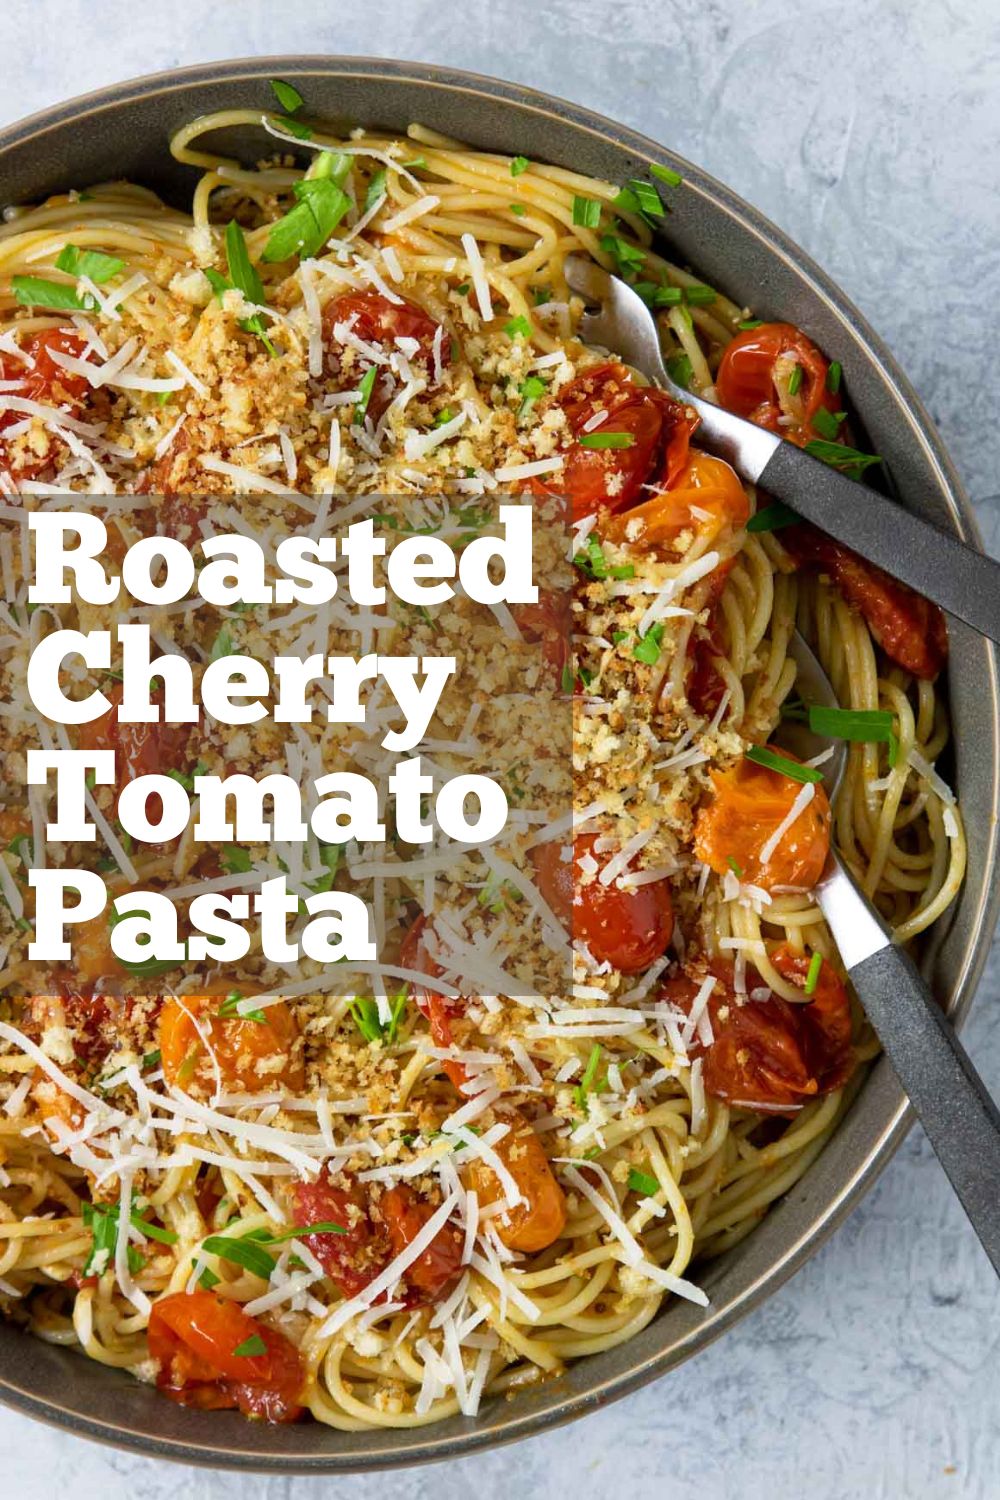 A dish full of pasta and roasted cherry tomato sauce with text overlay for Pinterest